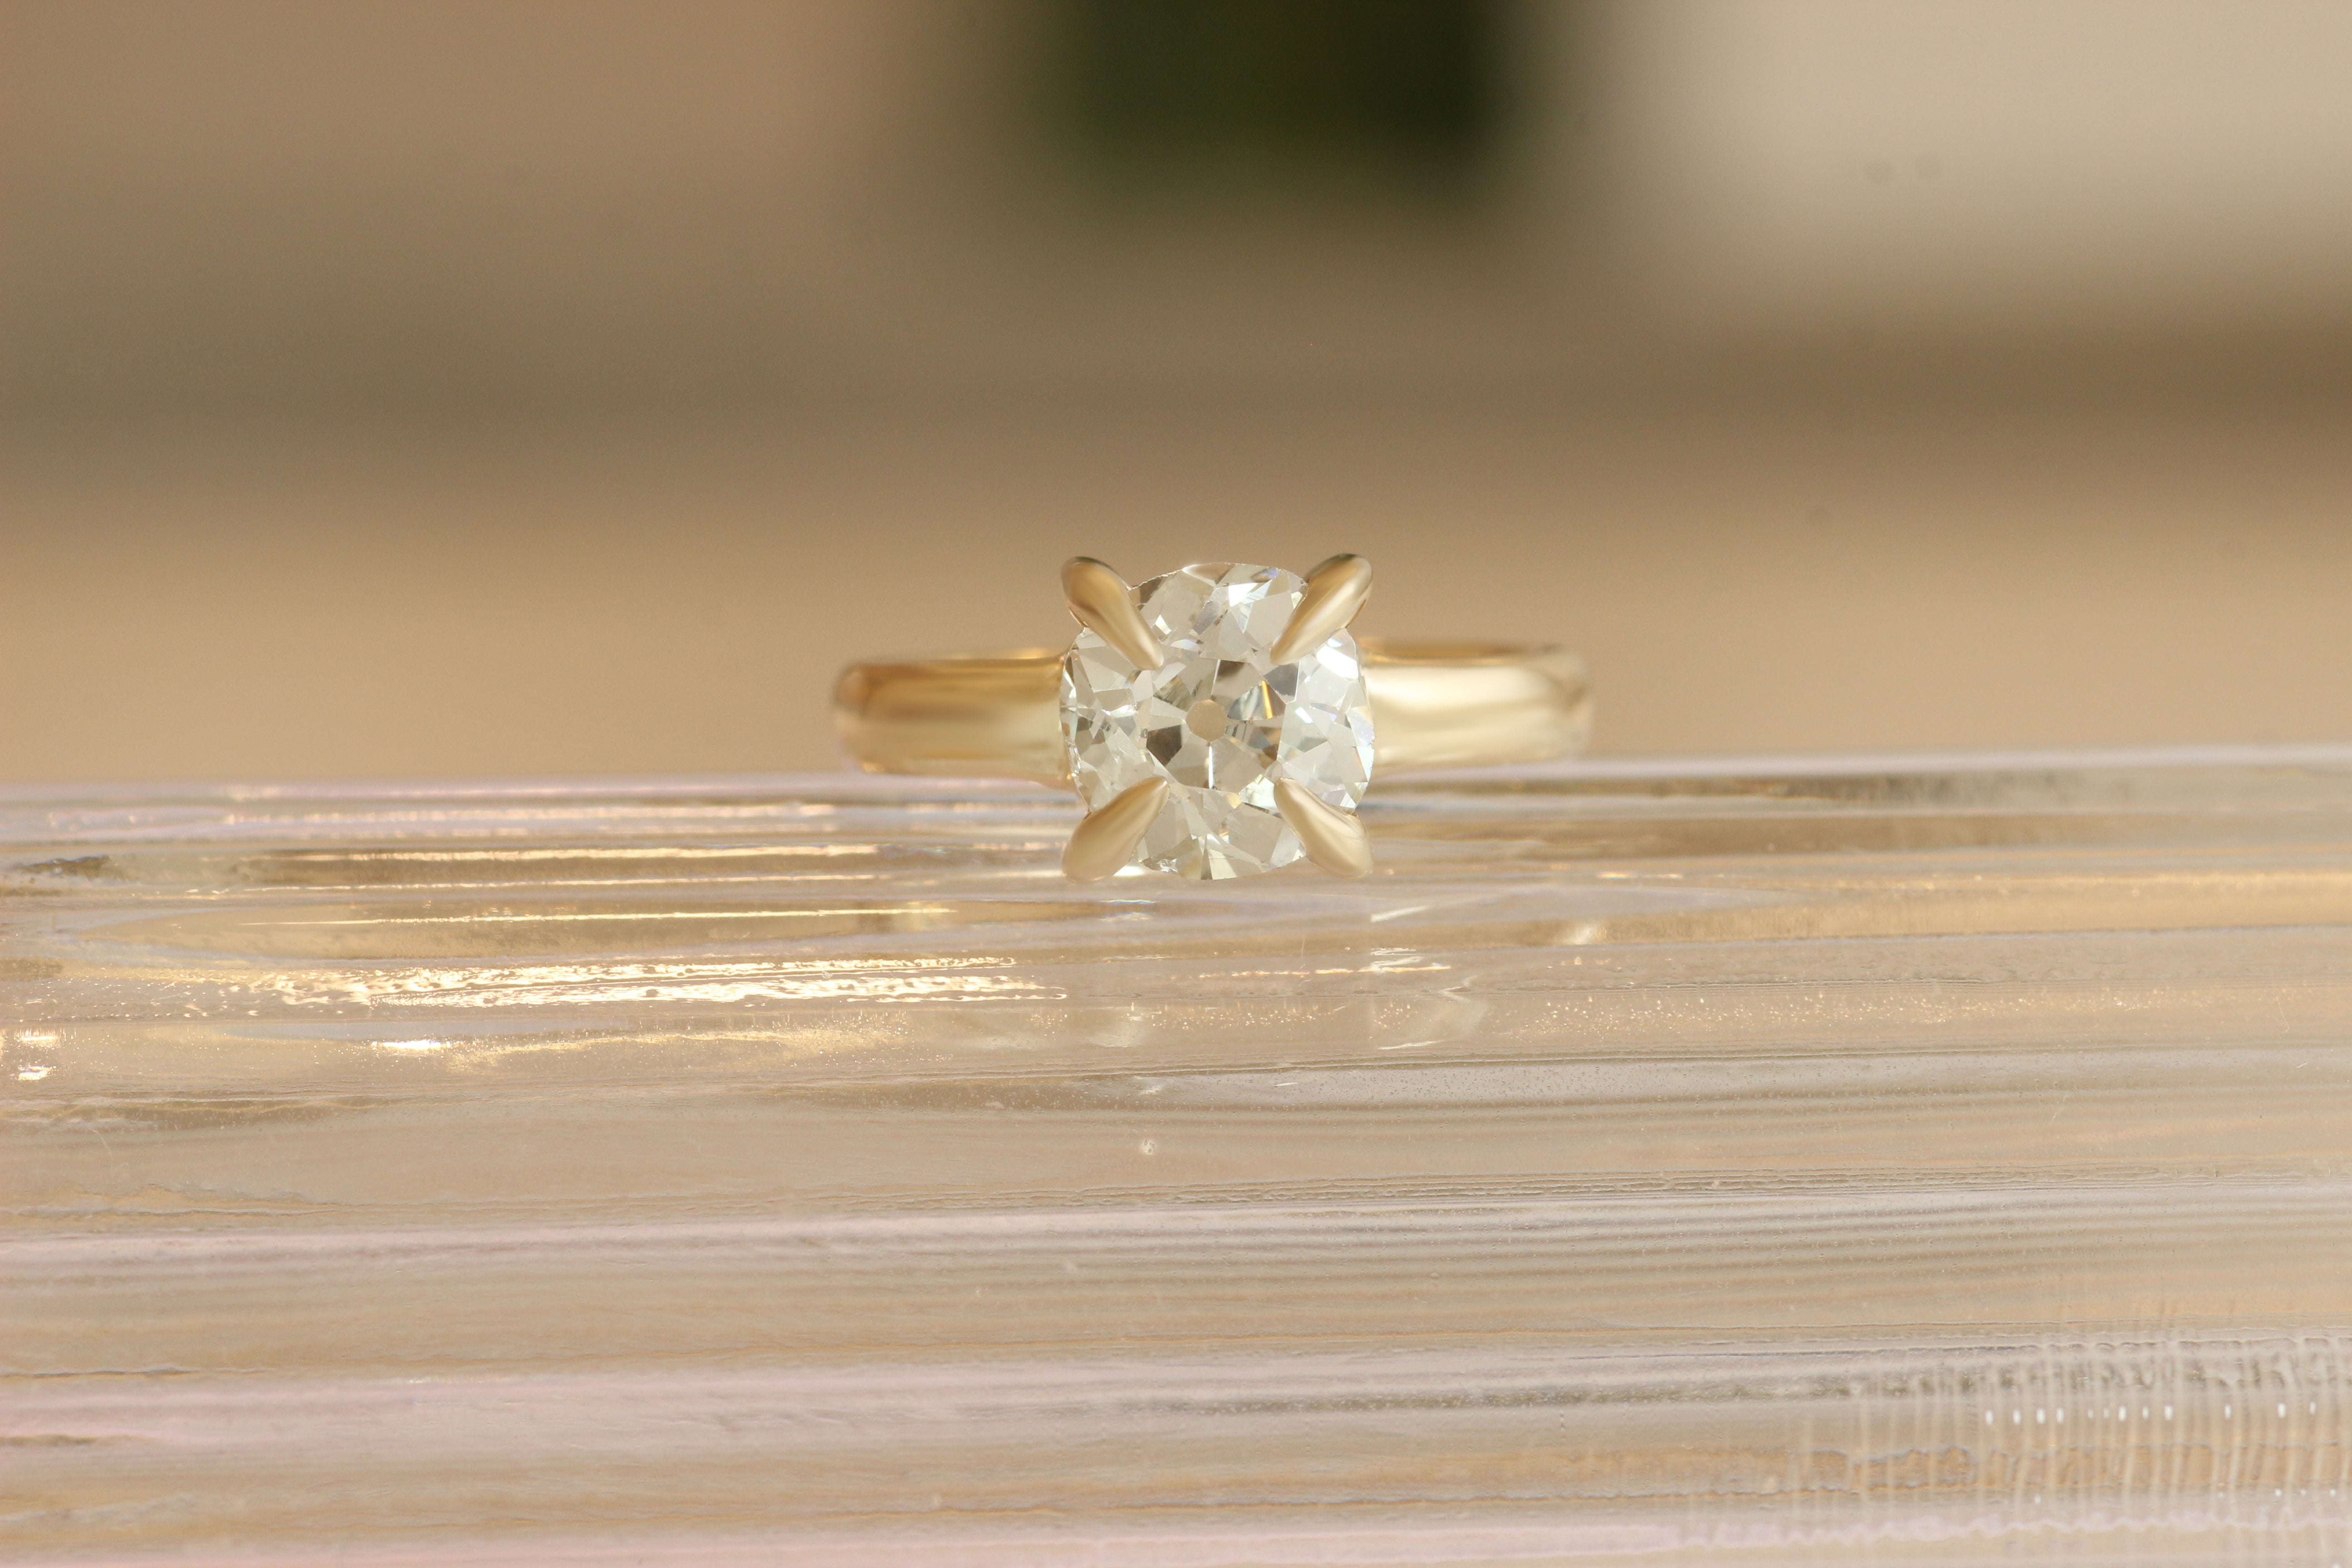 Side view of Adriana + Mike's custom engagement ring by Goldpoint Jewelry in Greenpoint, Brooklyn.